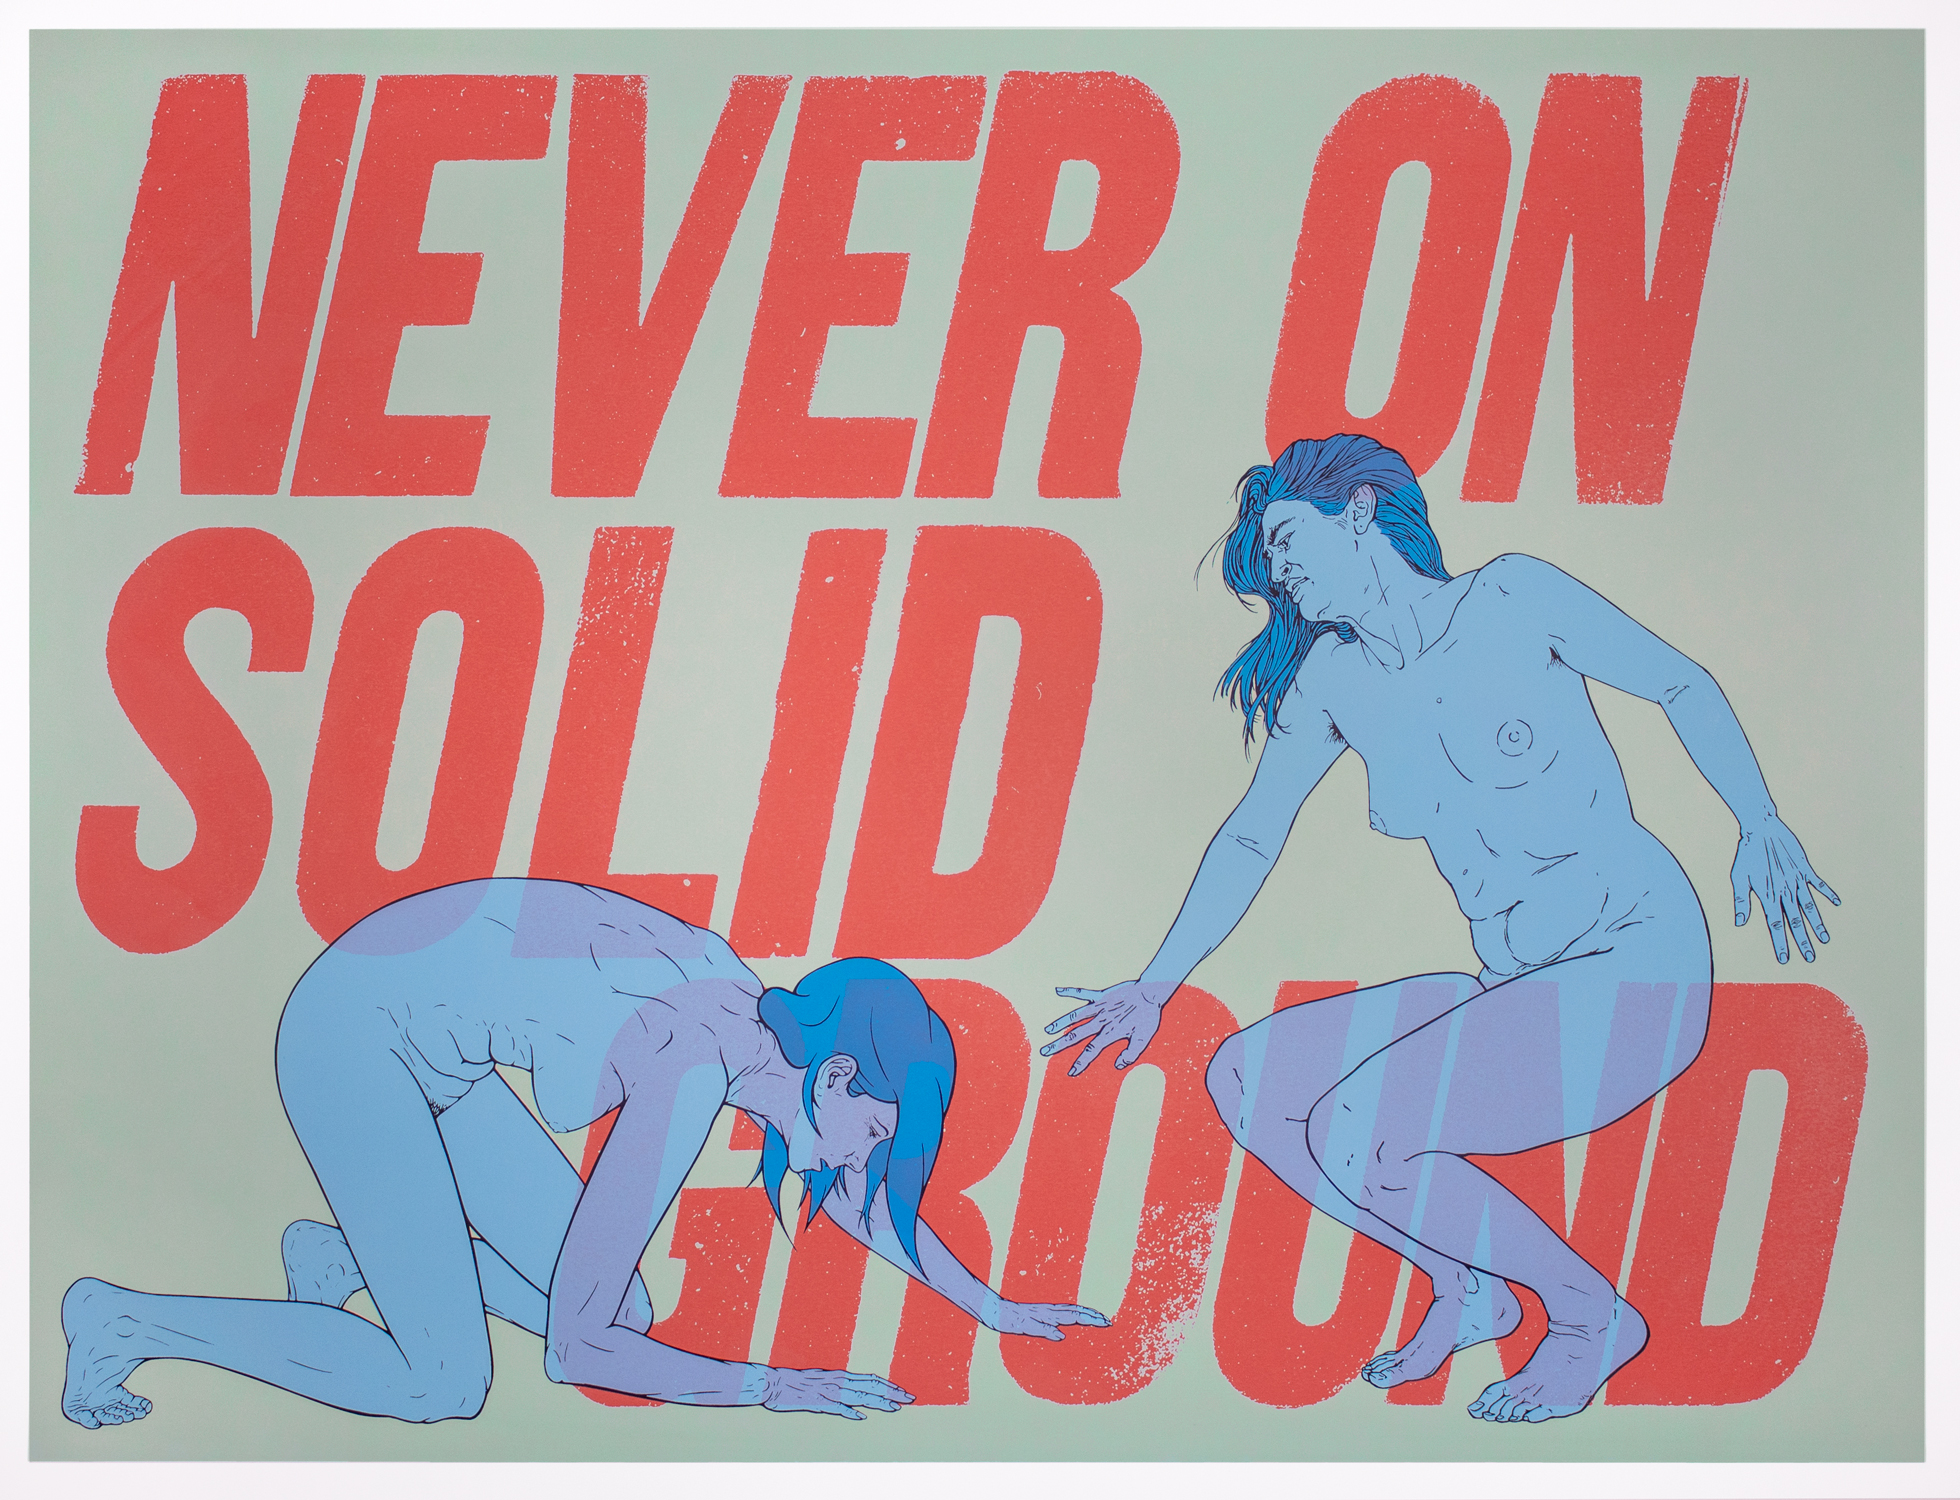 Never on Solid Ground, screenprint, 26 by 36 inches, 2021